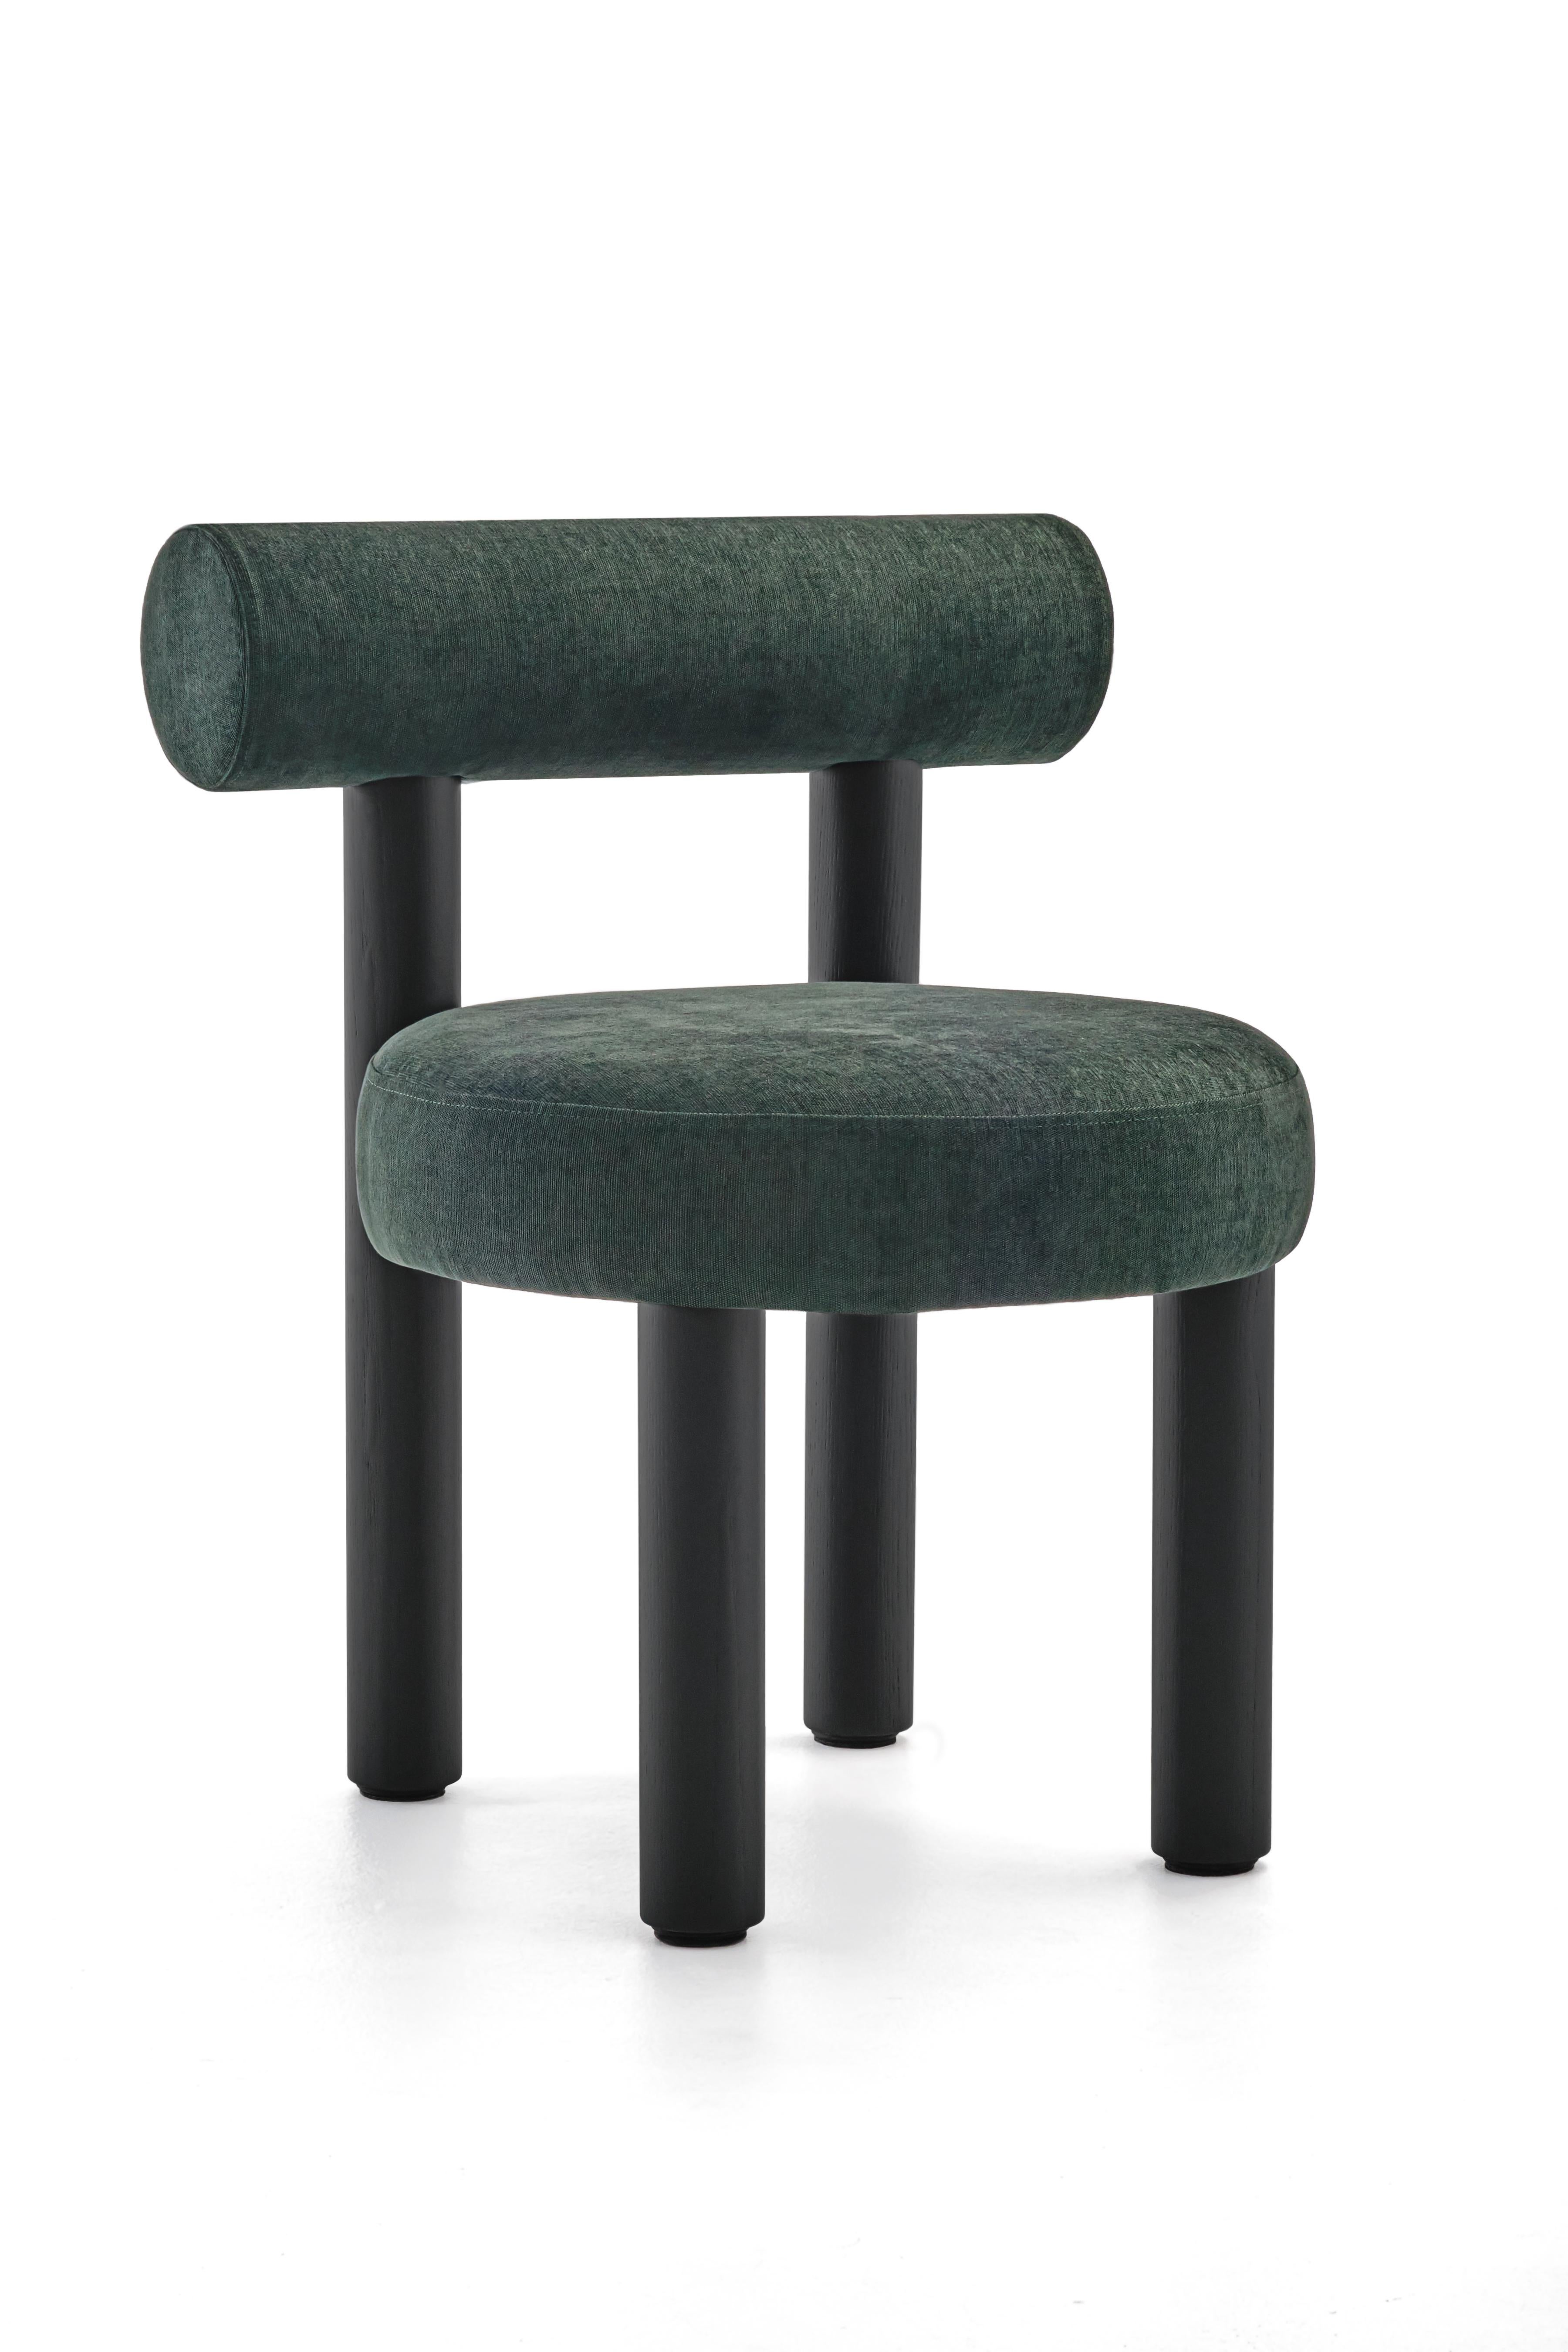 Contemporary Dining Chairs x6 Counter Chairs x2 'Gropius CS2' Black Wood Legs, Green Velvet For Sale